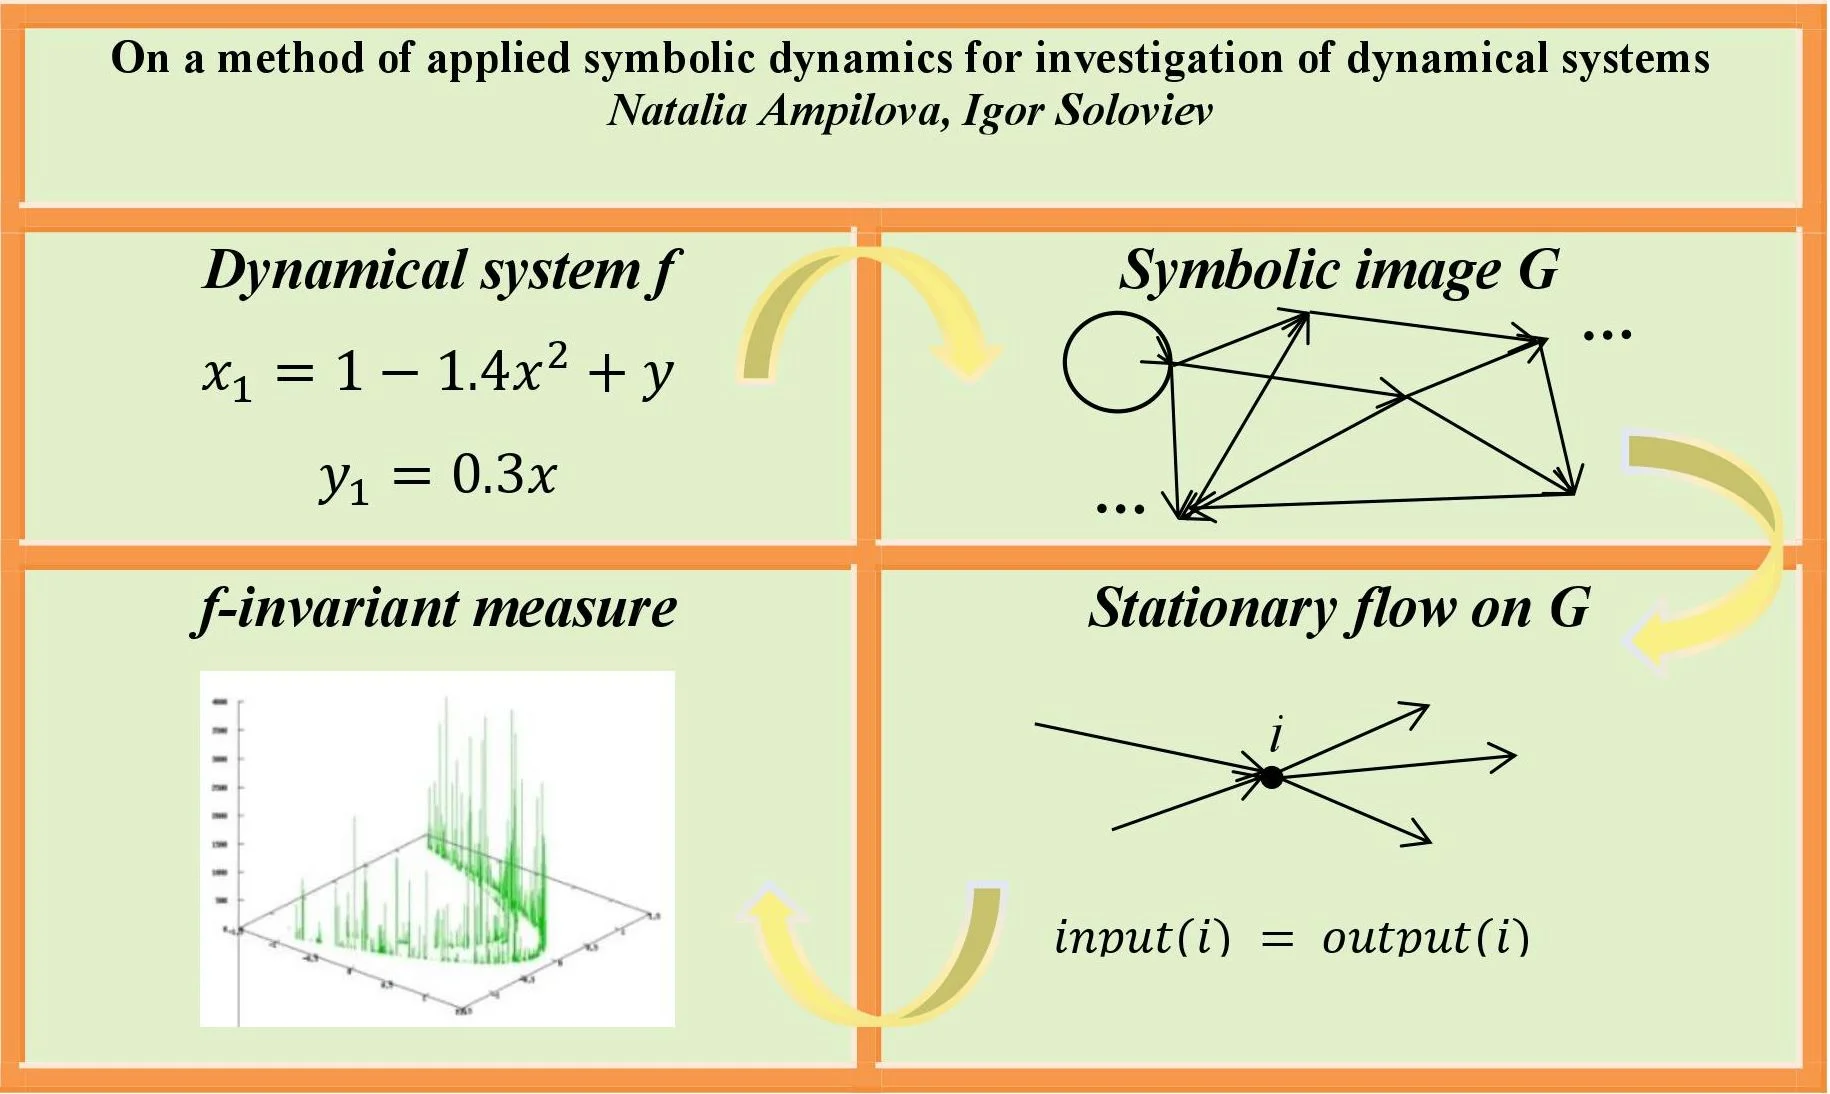 On a method of applied symbolic dynamics for investigation of dynamical systems